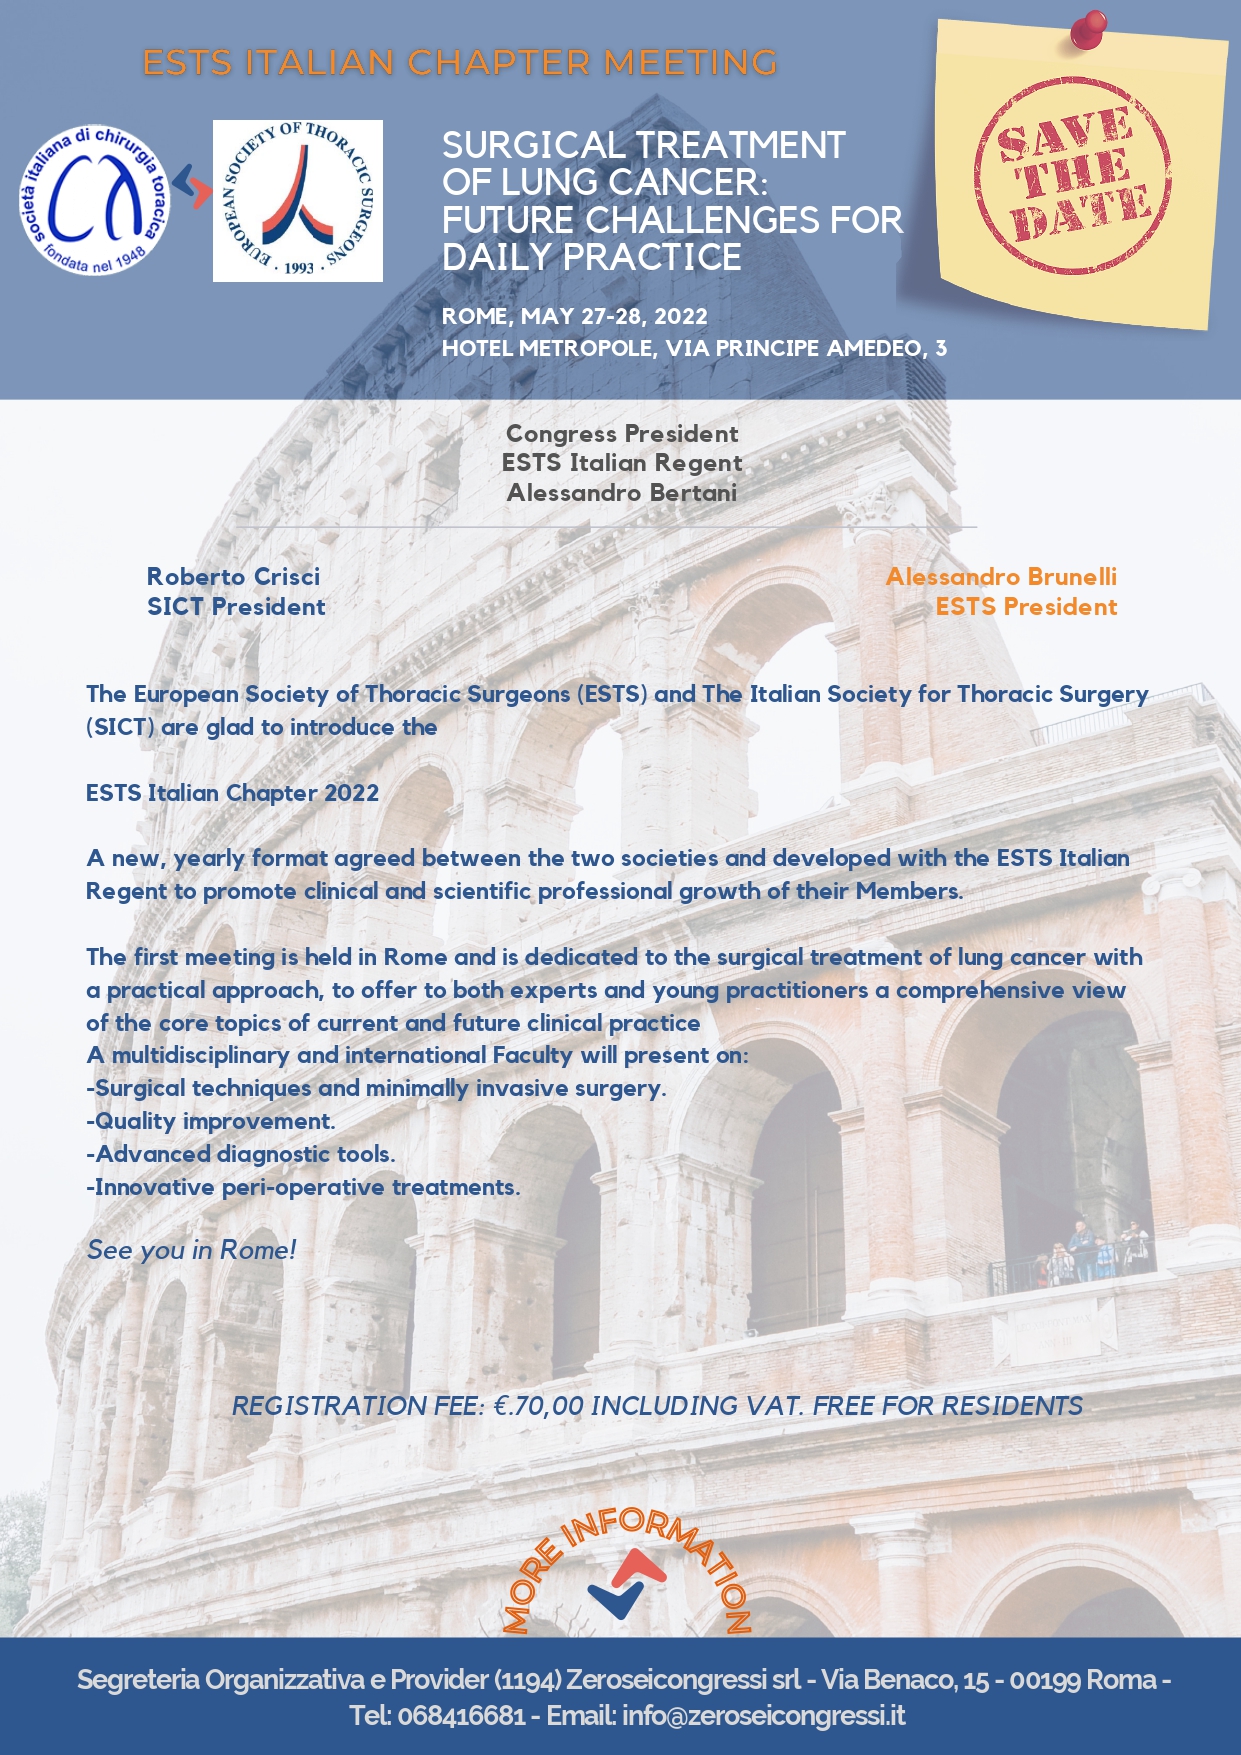 First ESTS Italian Chapter Meeting 2022, Rome, Italy 27 - 28 May 2022 image